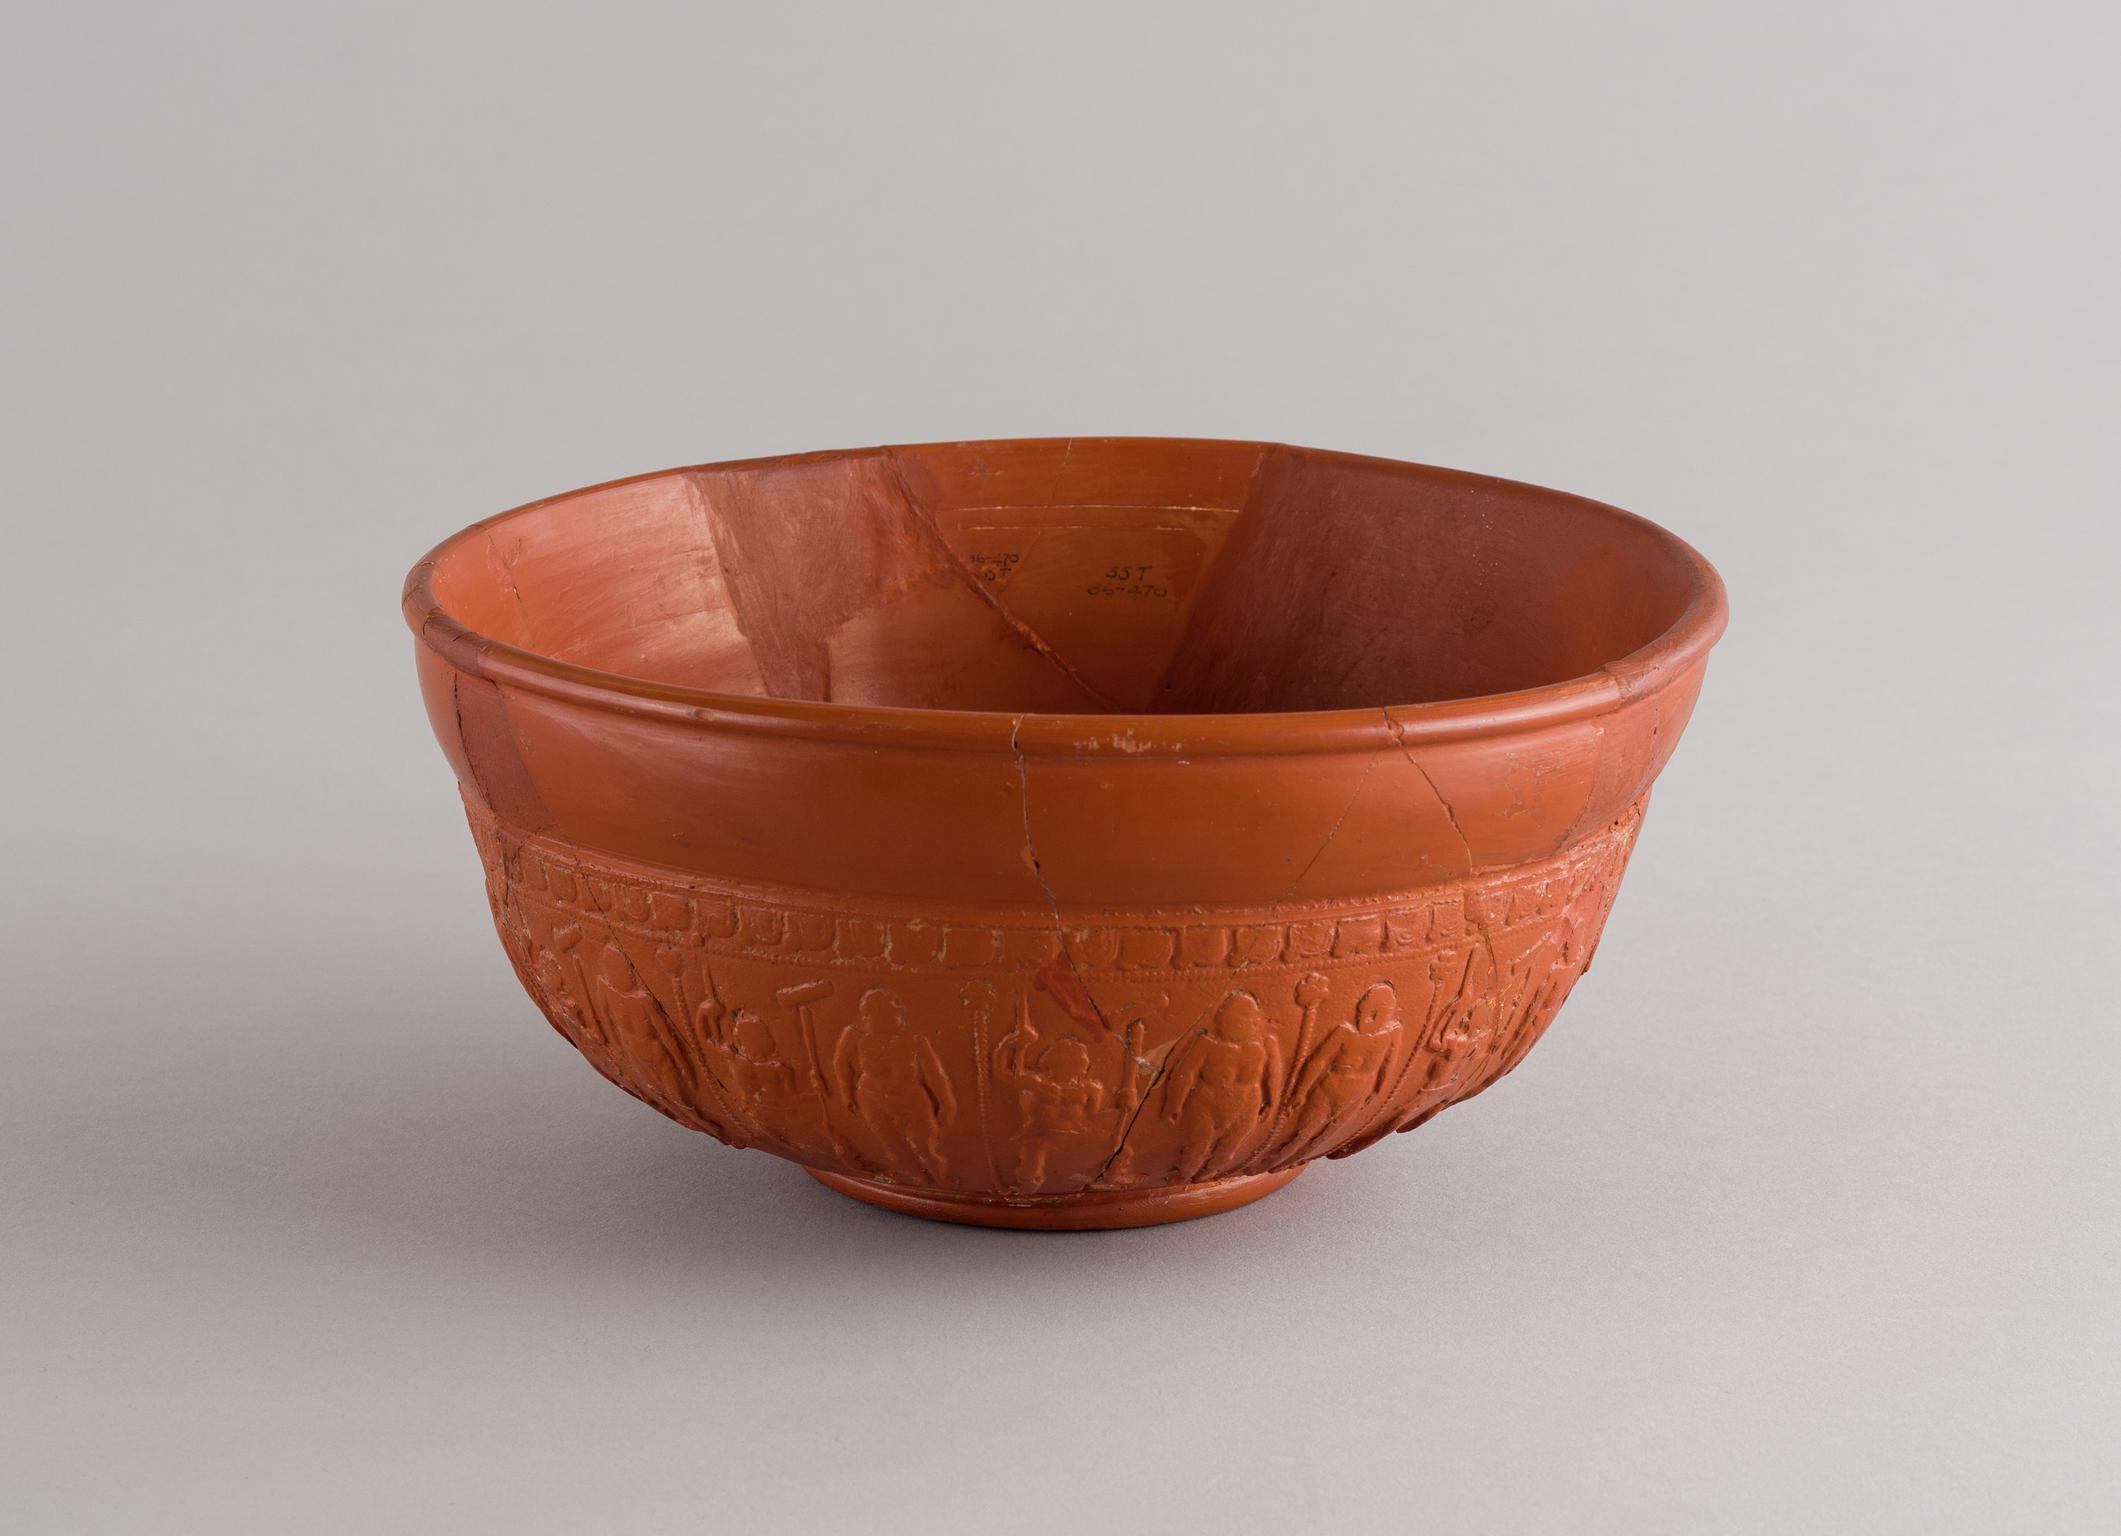 Roman samian bowl, decorated and stamped